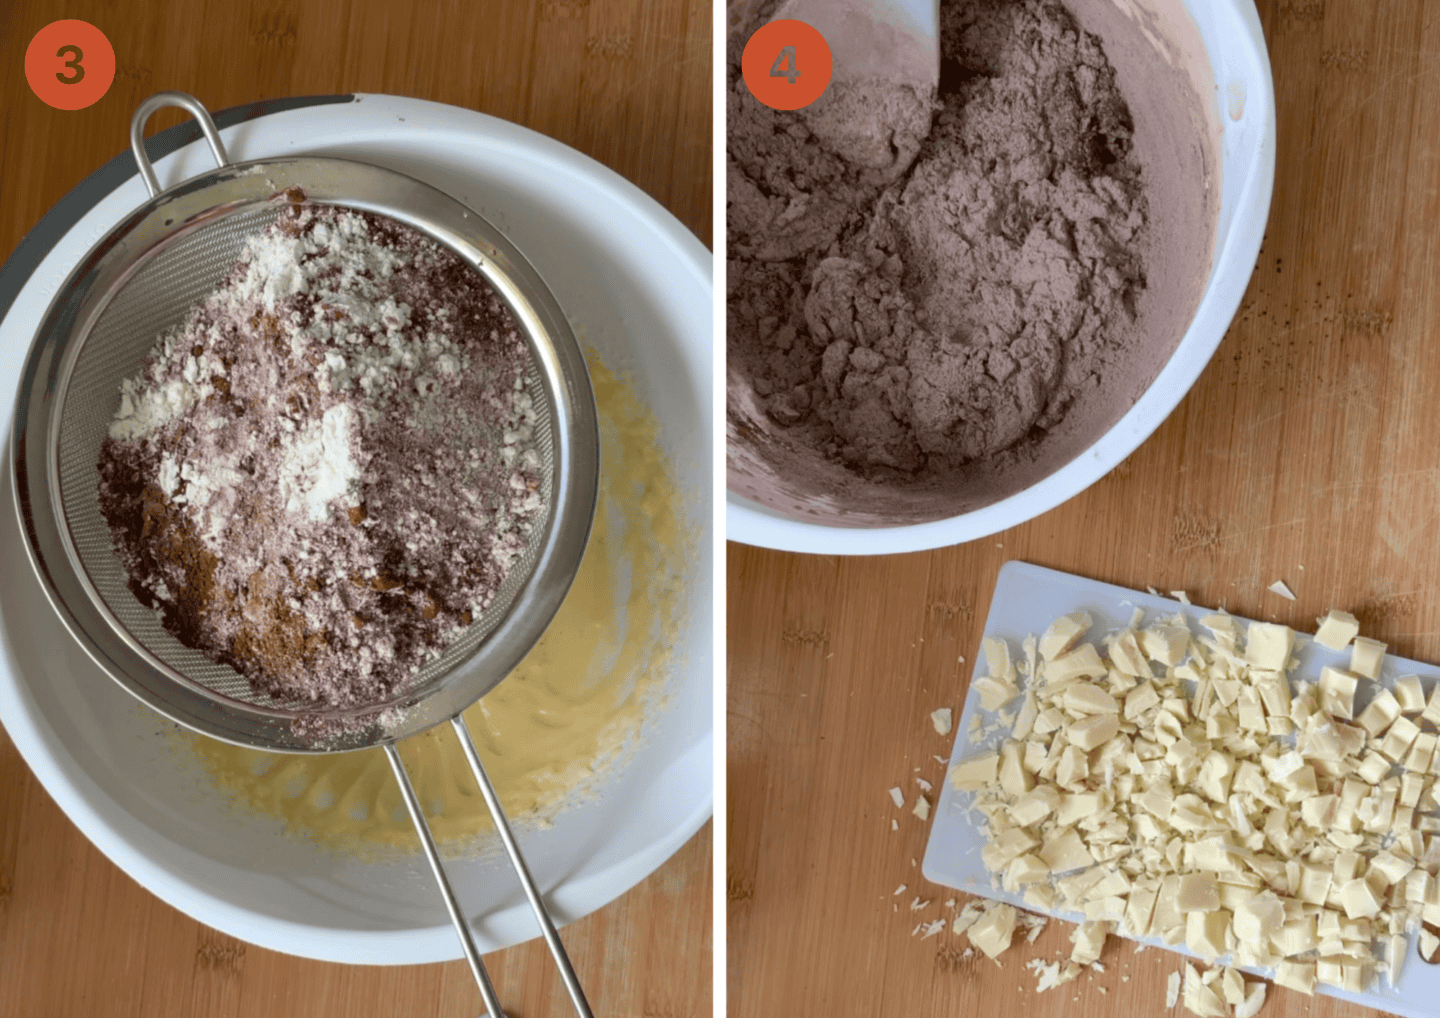 Sifting in the flour and cocoa powder and adding the chopped white chocolate.